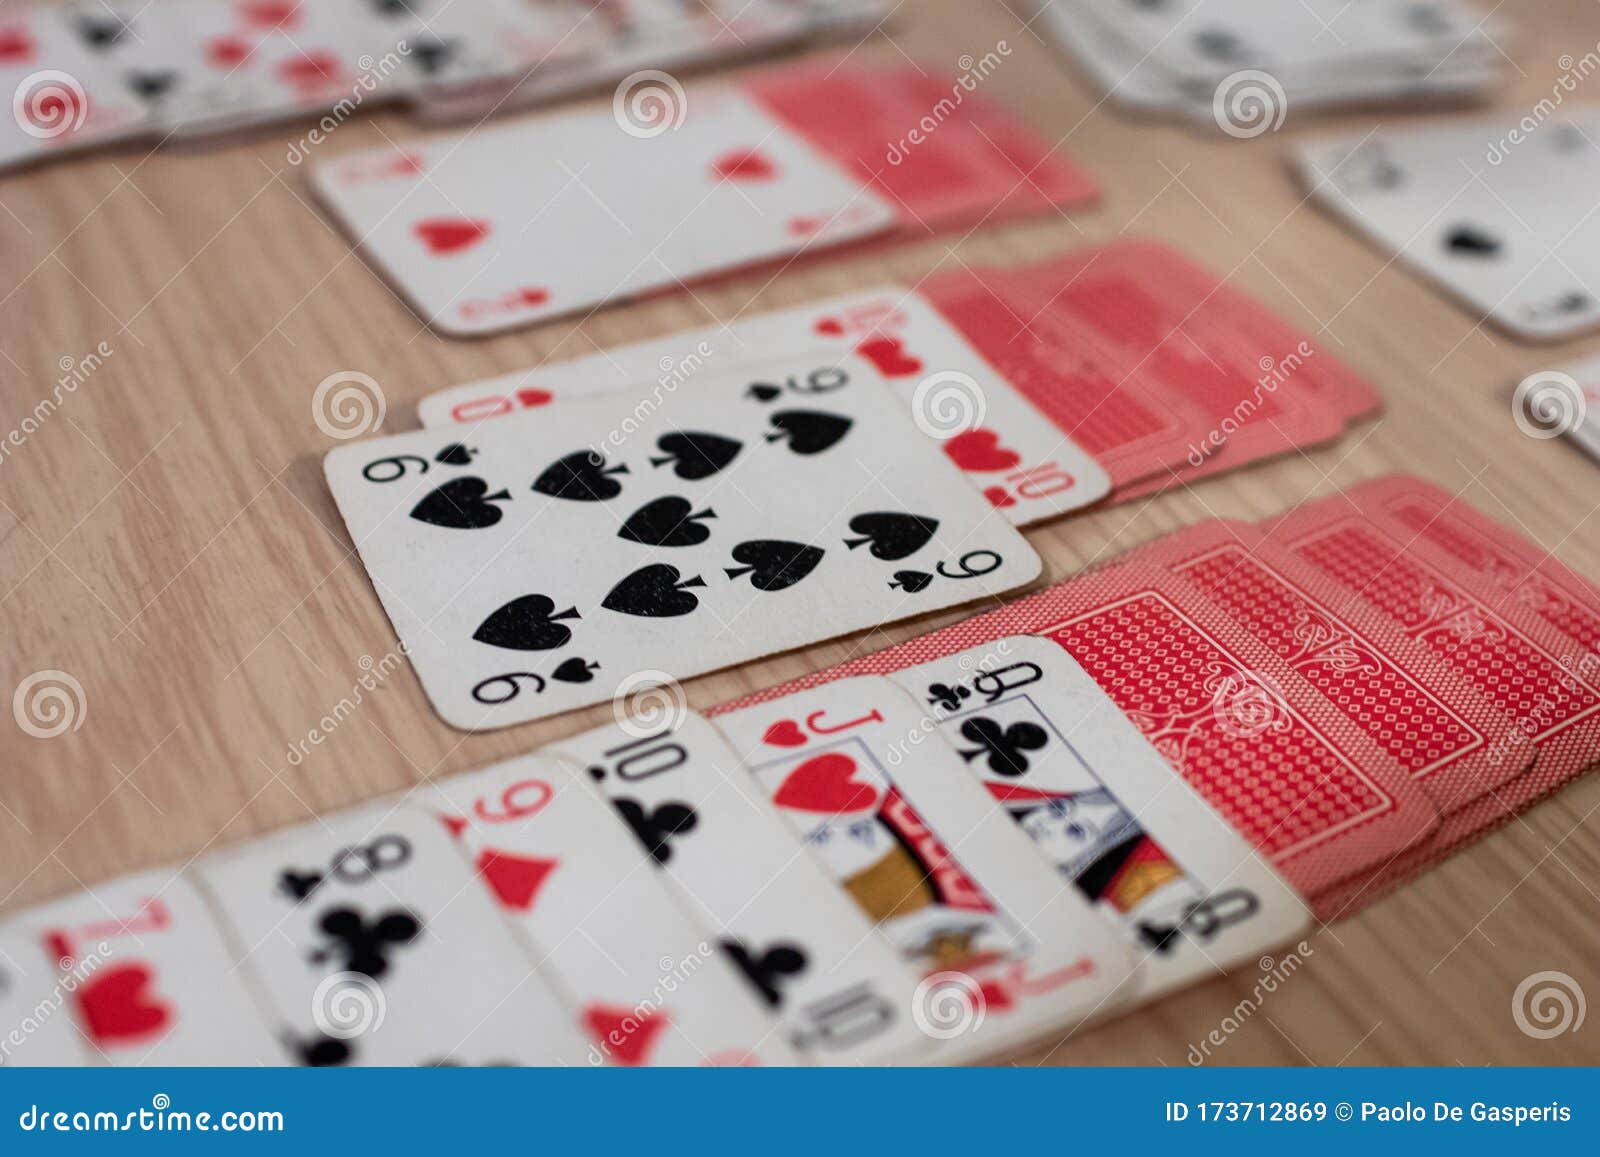 French Playing Cards Stacked Together In A Solitaire Solitaire Game With Cards Pastime With Signs And Cards With Red Backs And Stock Image Image Of Card Alone